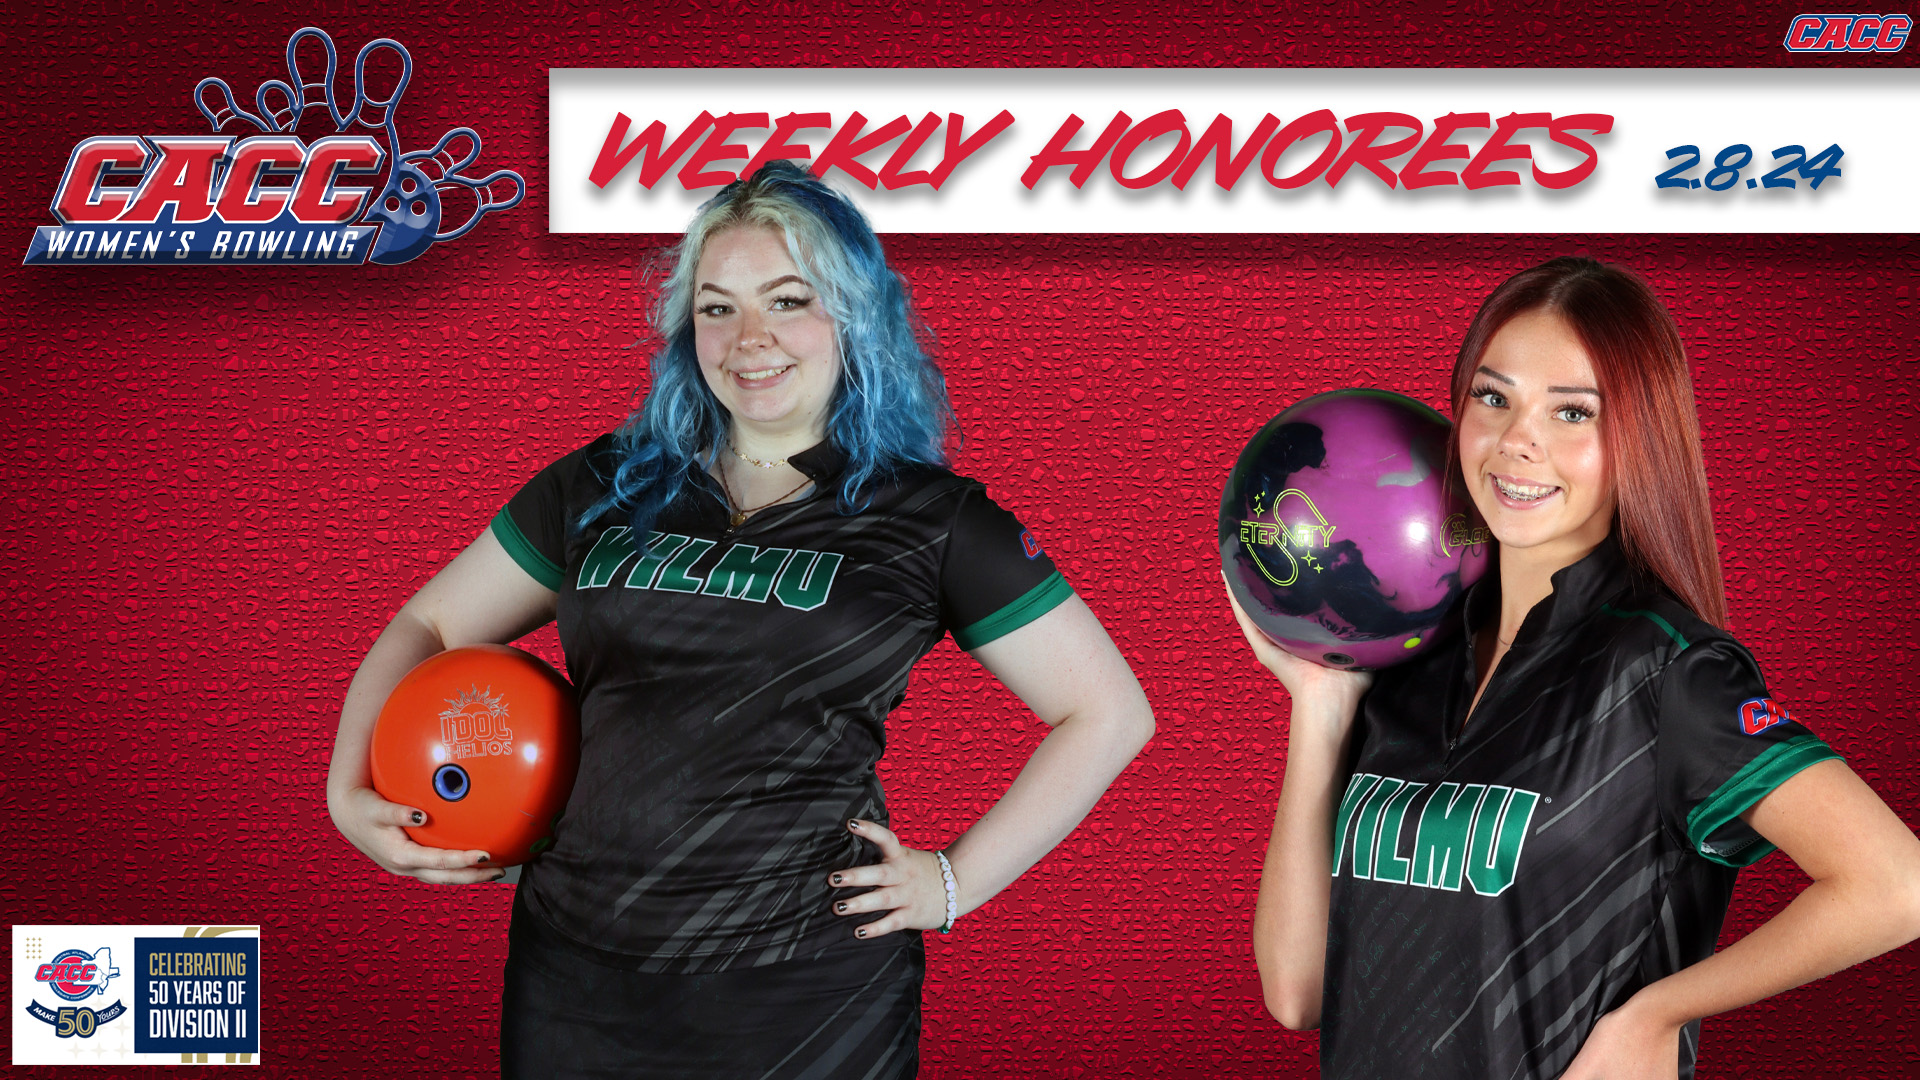 CACC Women's Bowling Weekly Honorees (2-8-24)